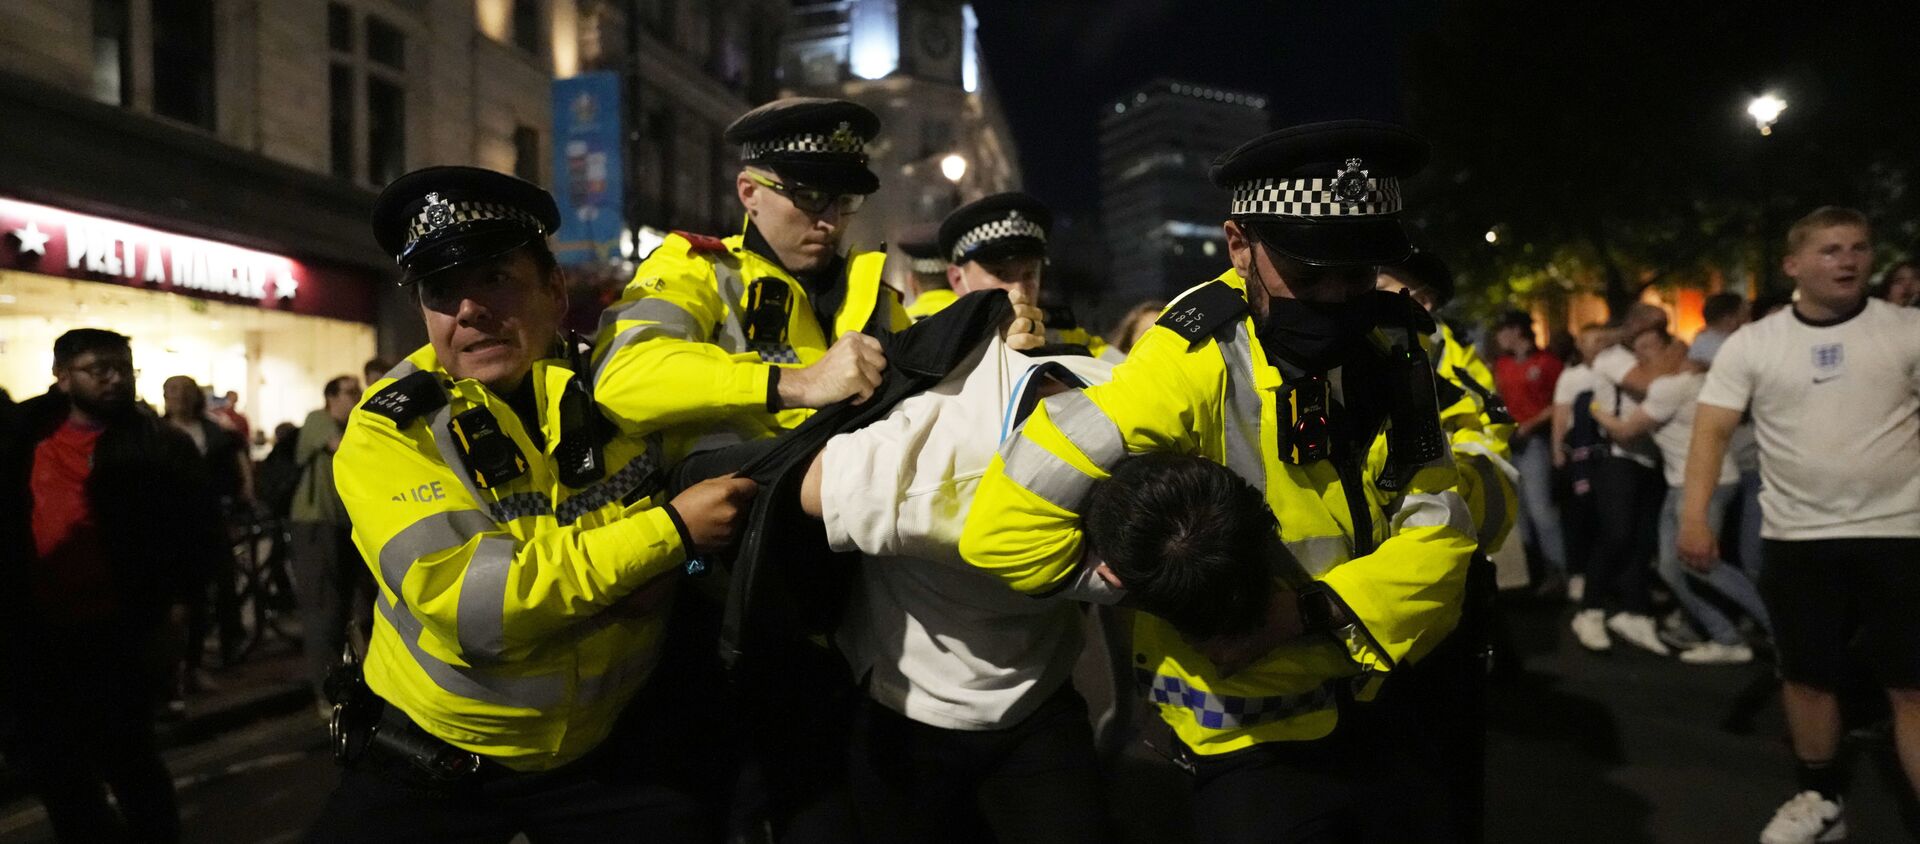 Police detain a man near Trafalgar Square during celebrations after England won the Euro 2020 soccer championship semifinal match between England and Denmark played at Wembley Stadium in London, Wednesday, July 7, 2021. - Sputnik International, 1920, 08.07.2021